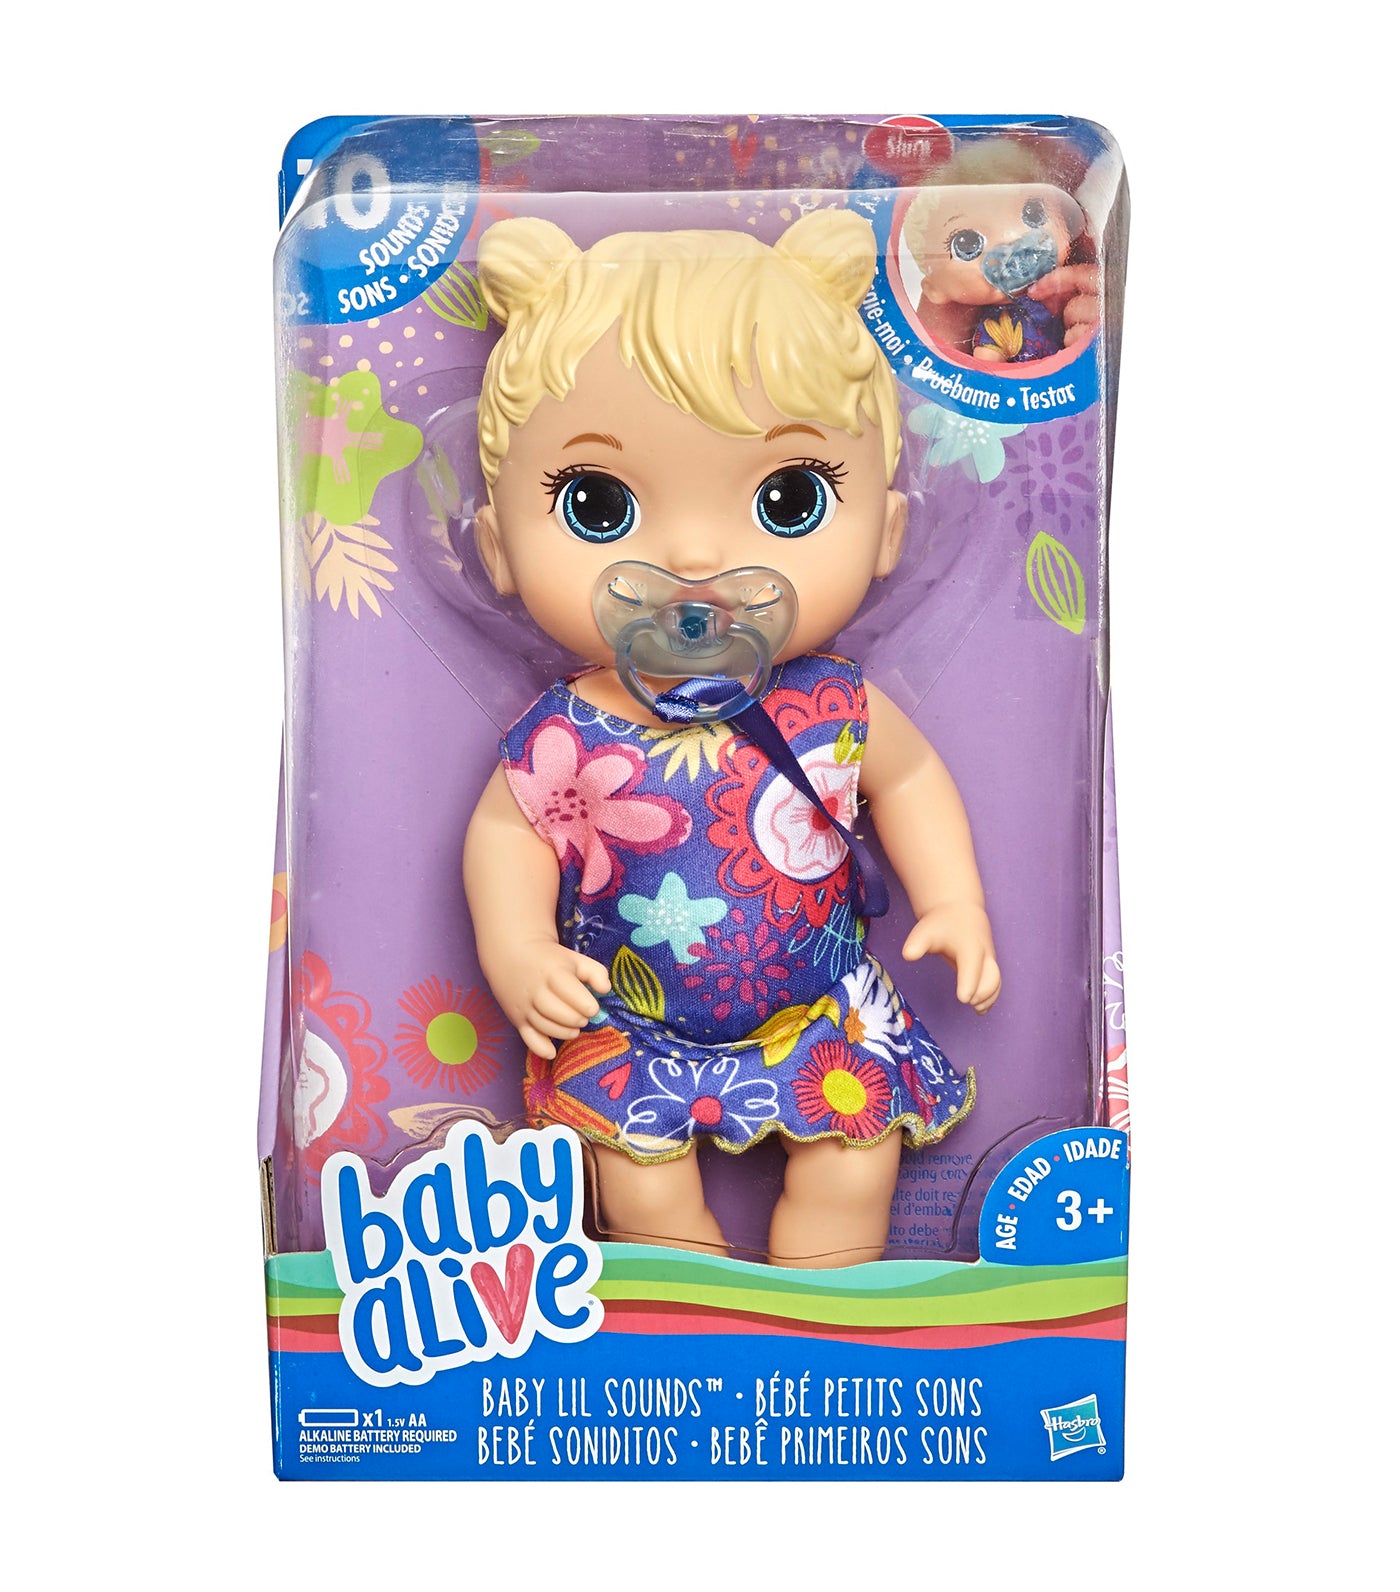 Baby Alive Baby Lil Sounds - Blonde